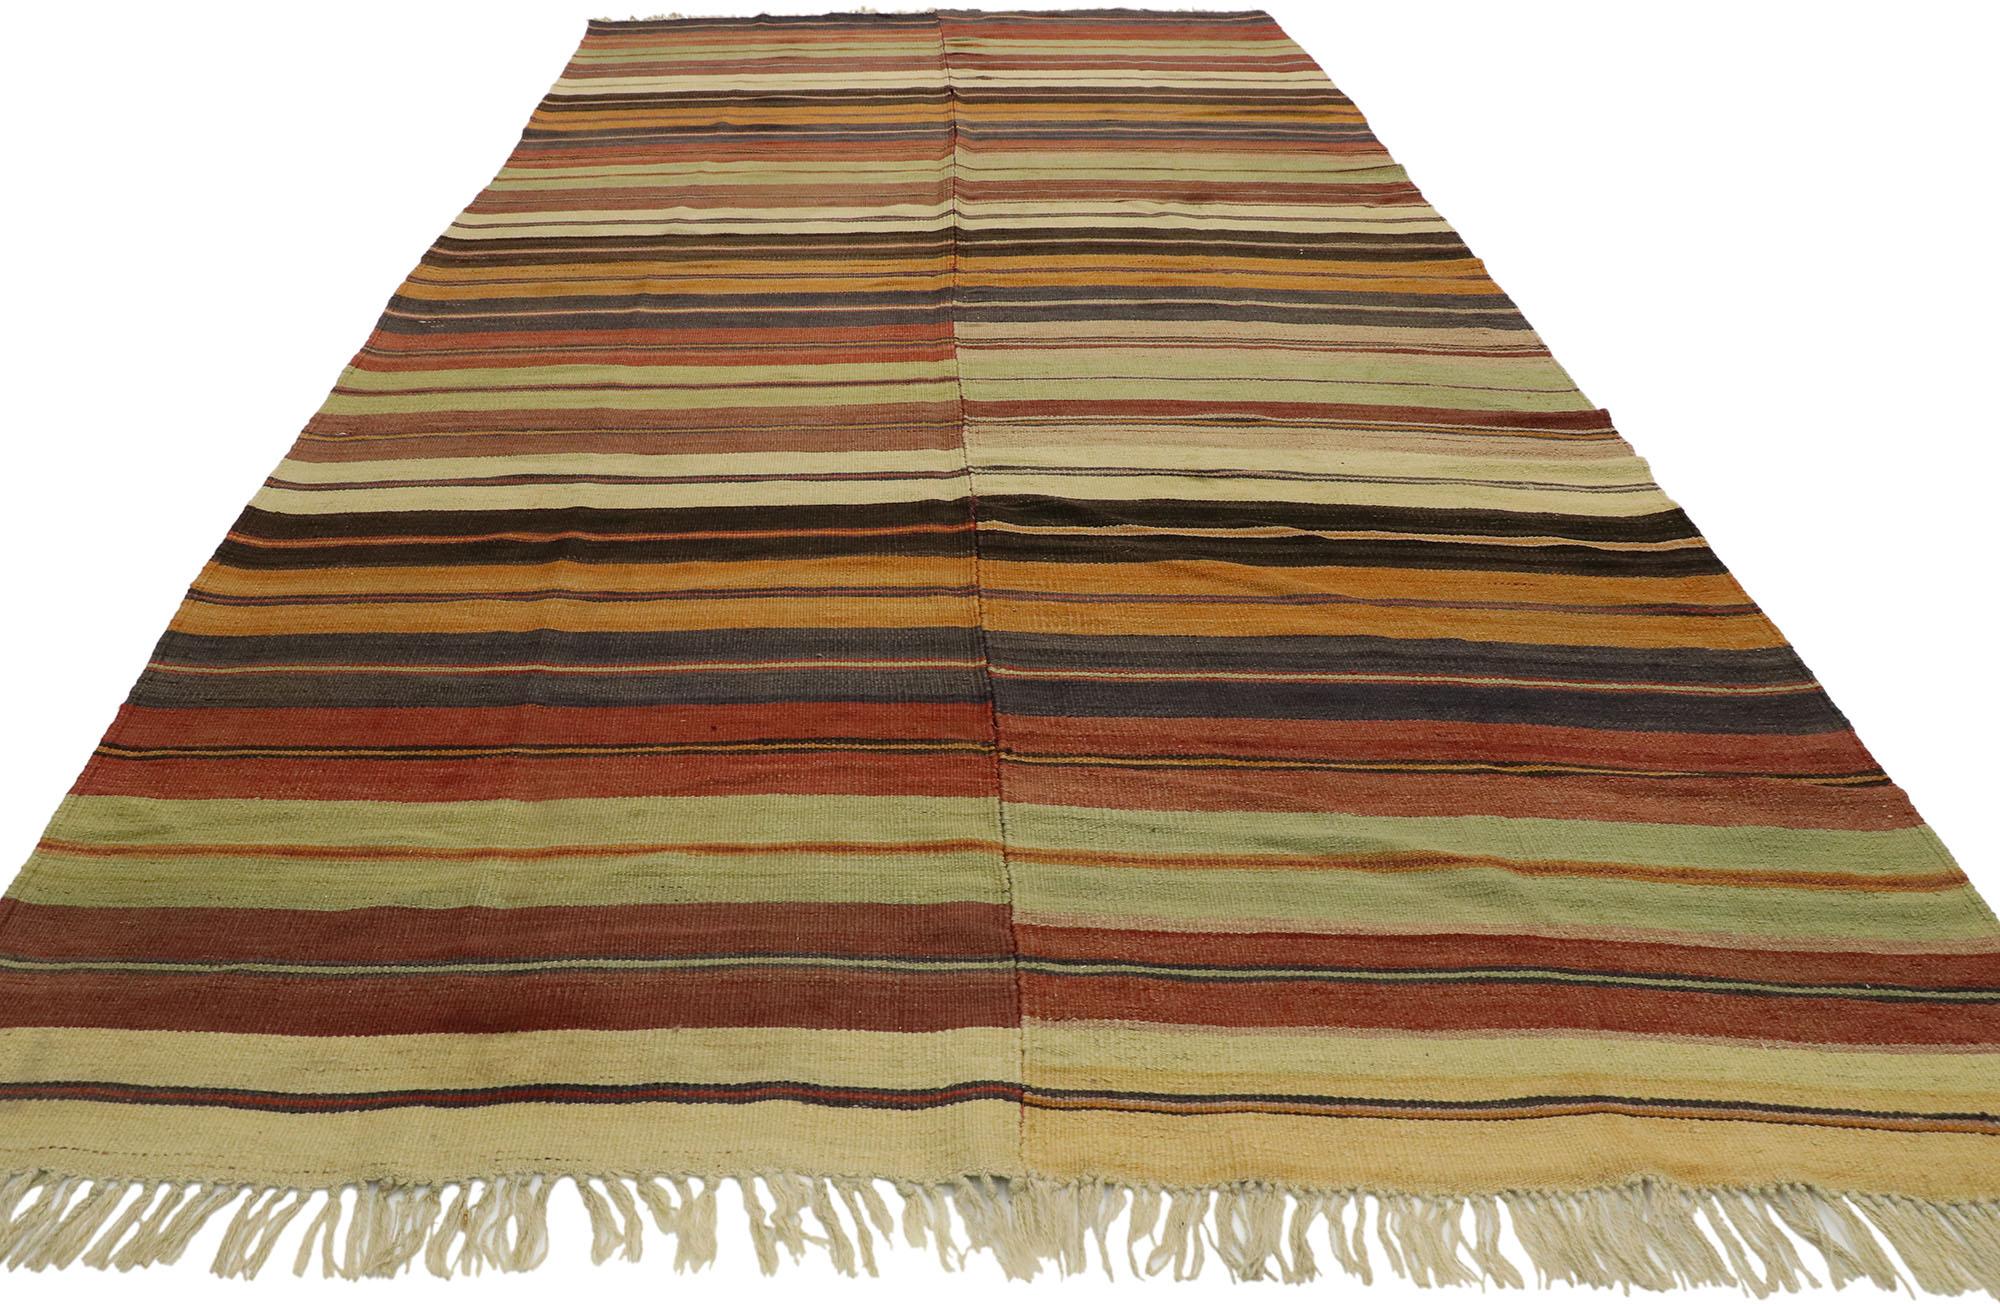 Hand-Woven Distressed Vintage Turkish Striped Kilim Rug with Modern Rustic Cabin Style